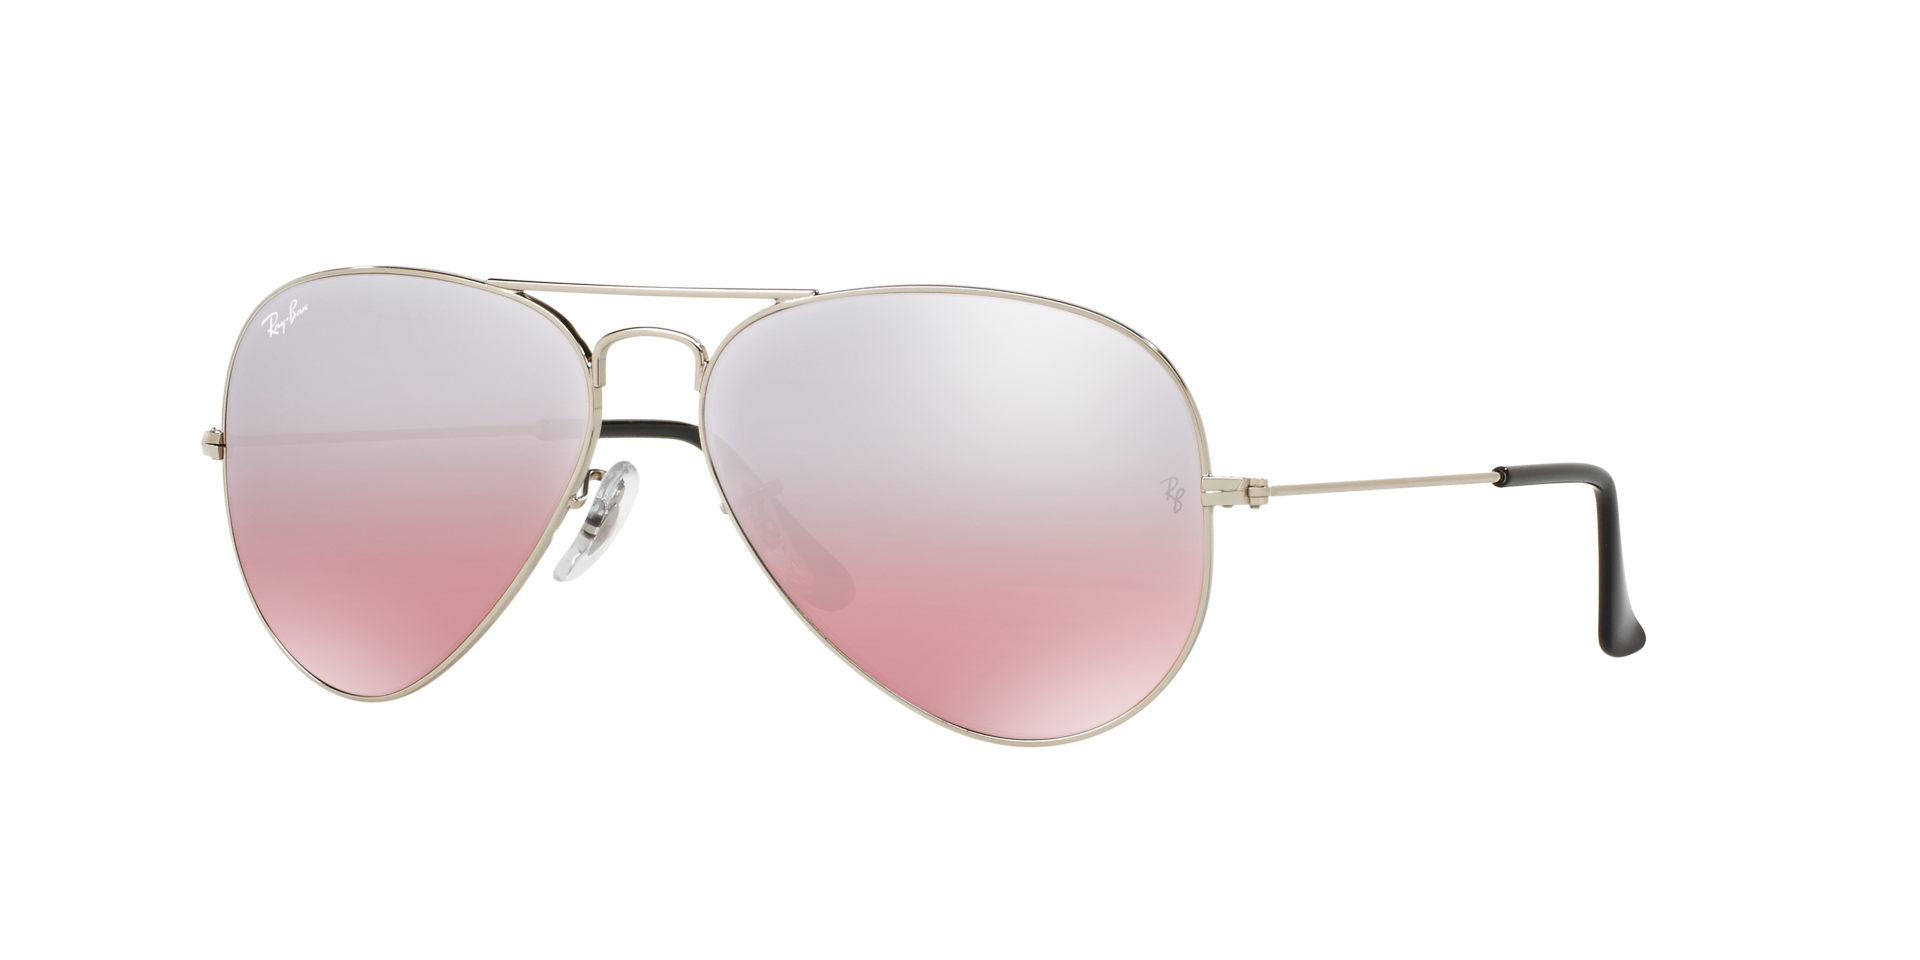 Candy Cove Aviator Sunglasses - Polarized Pink Lens With Gloss Rose Top Bar  Frame